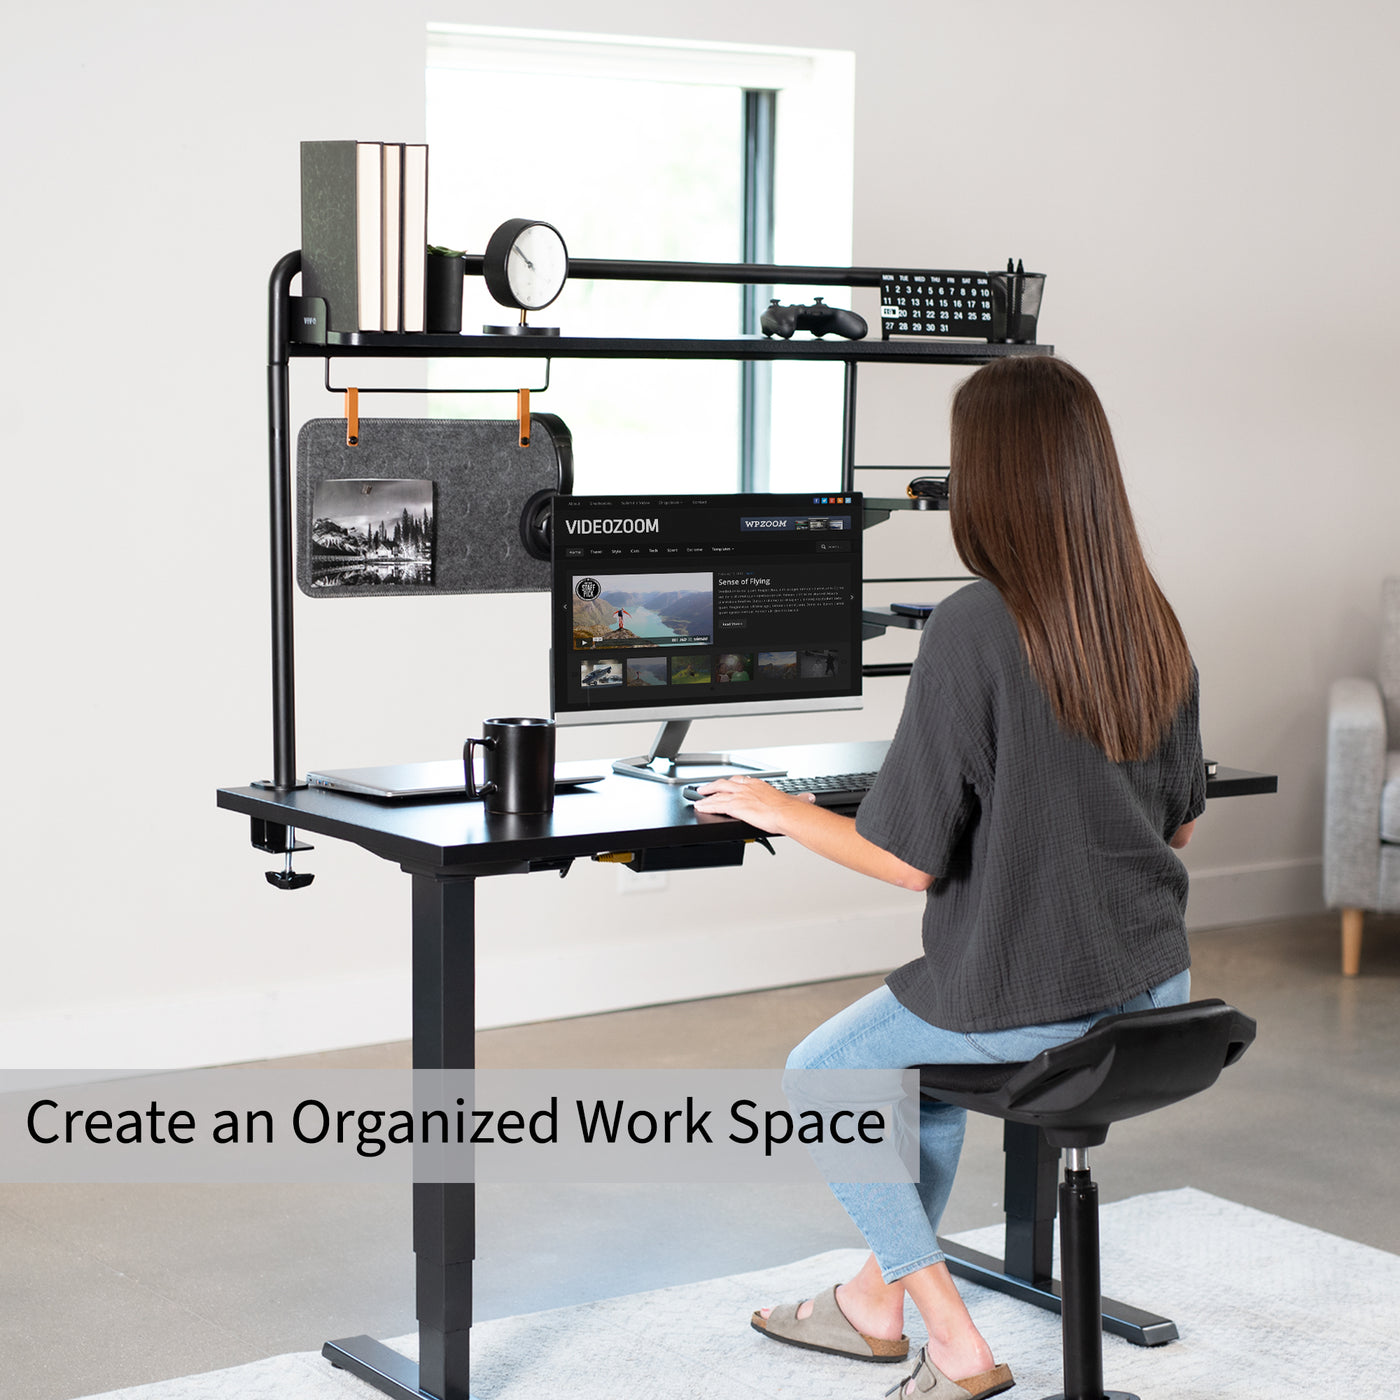 Clamp-on Desktop Shelving System for organizing office workspaces.